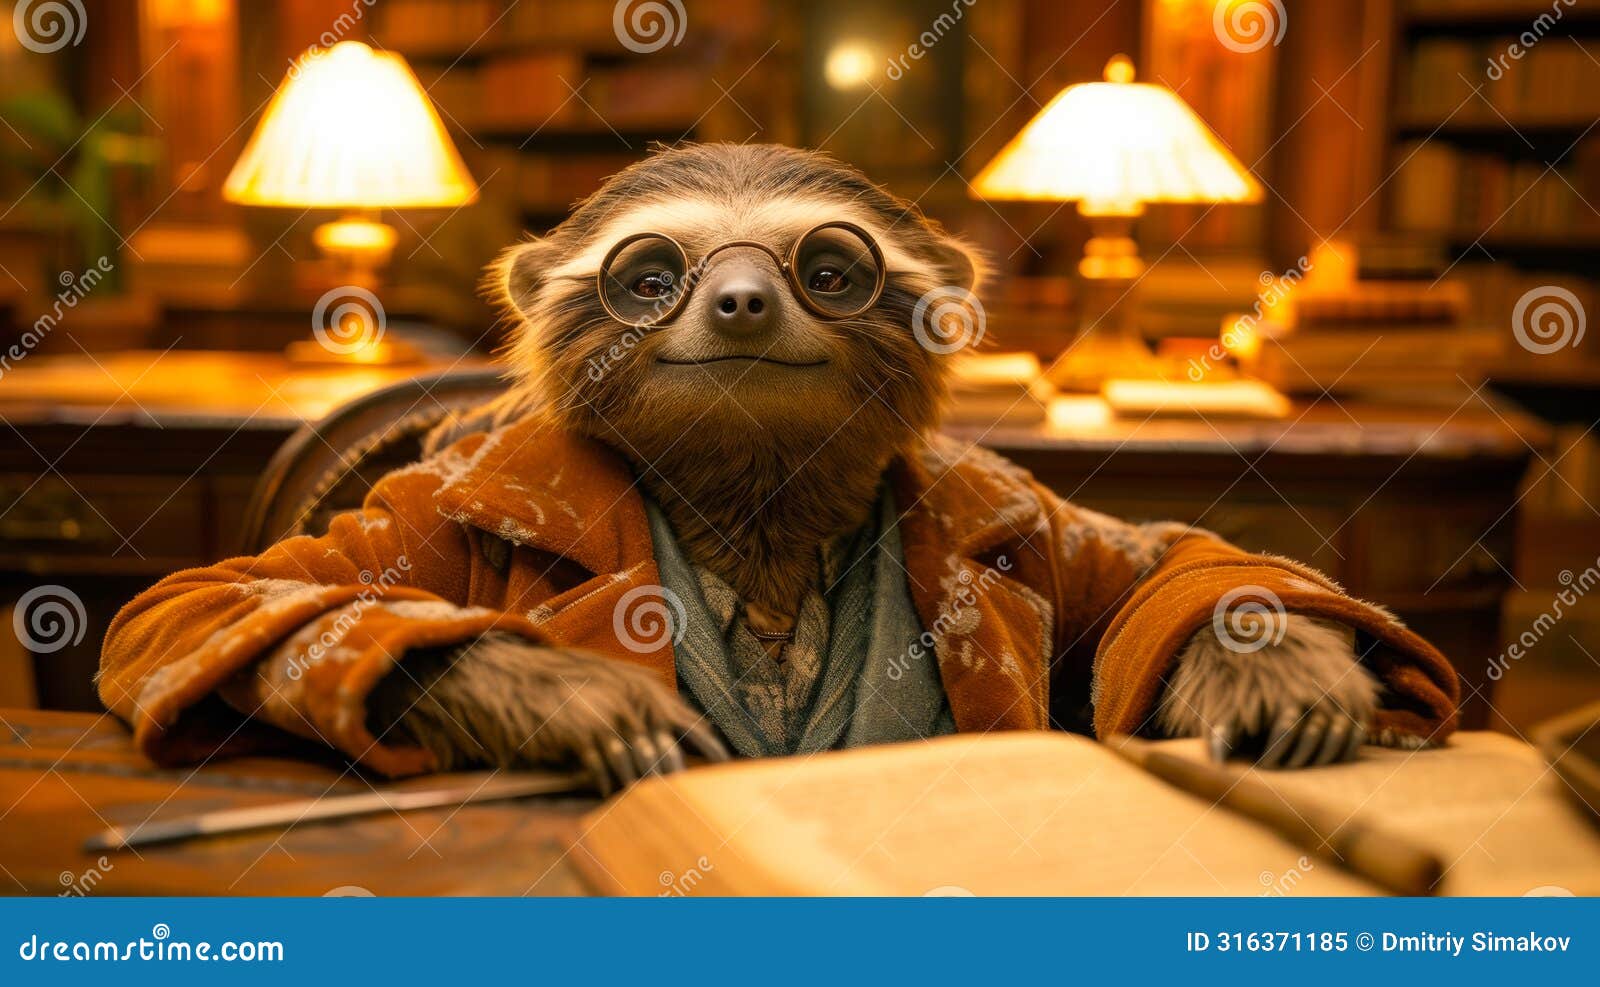 suave sloth in a